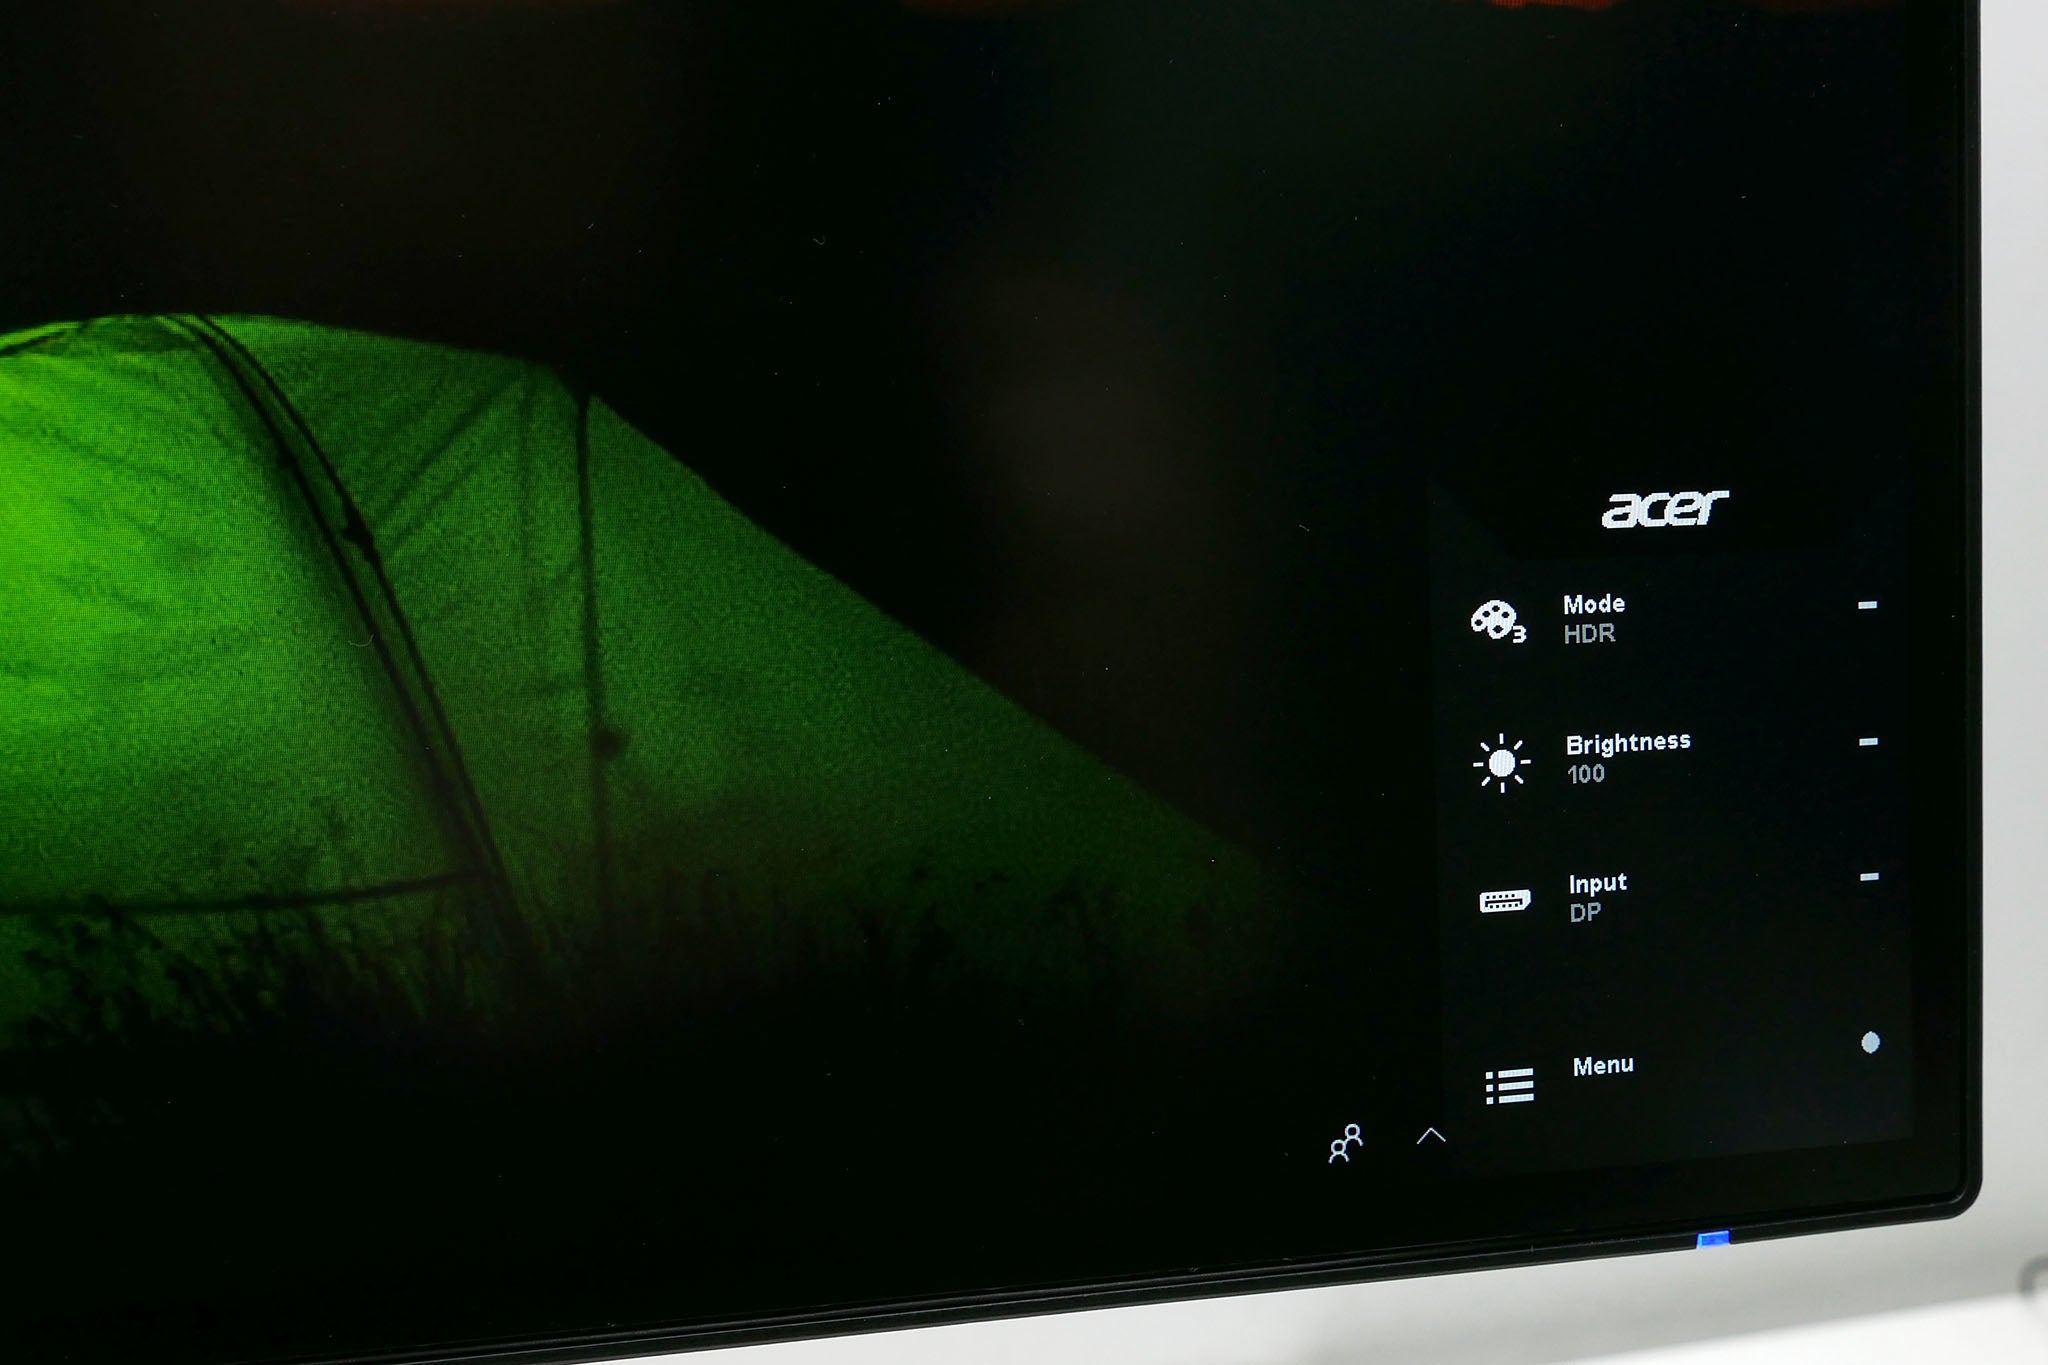 Acer ProDesigner PE320QK monitor displaying HDR mode and brightness settings.